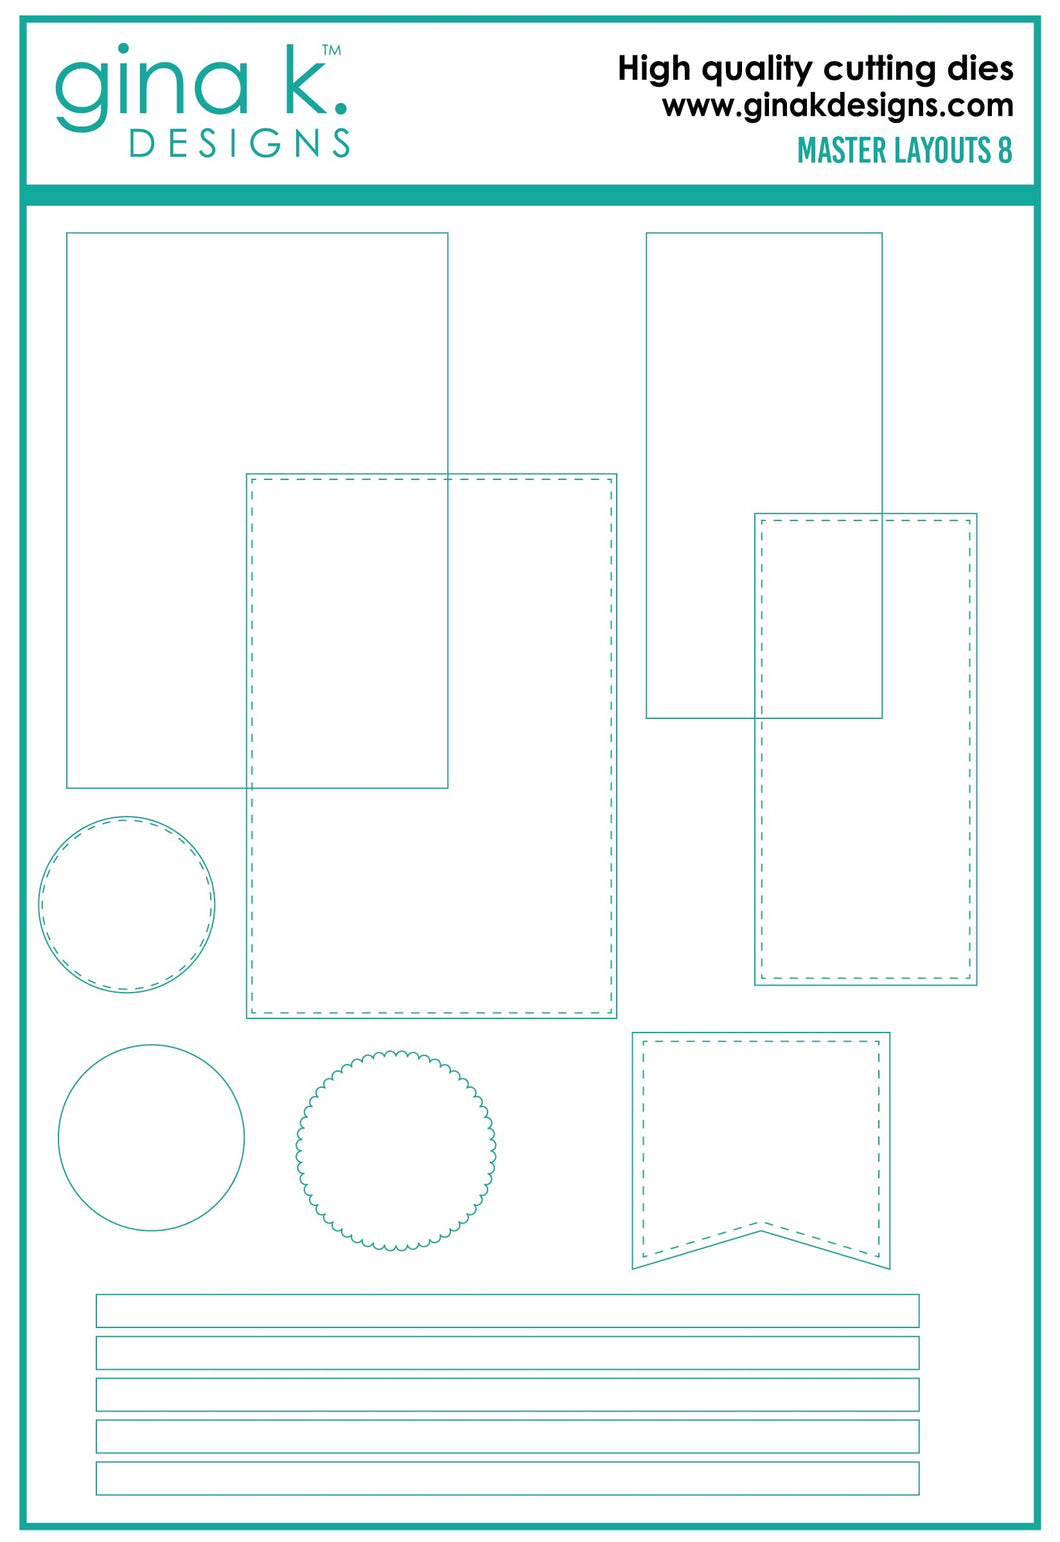 Gina K. Designs - Die Set - Master Layouts 8. The Master Layouts 8 die set is sized perfectly for 5